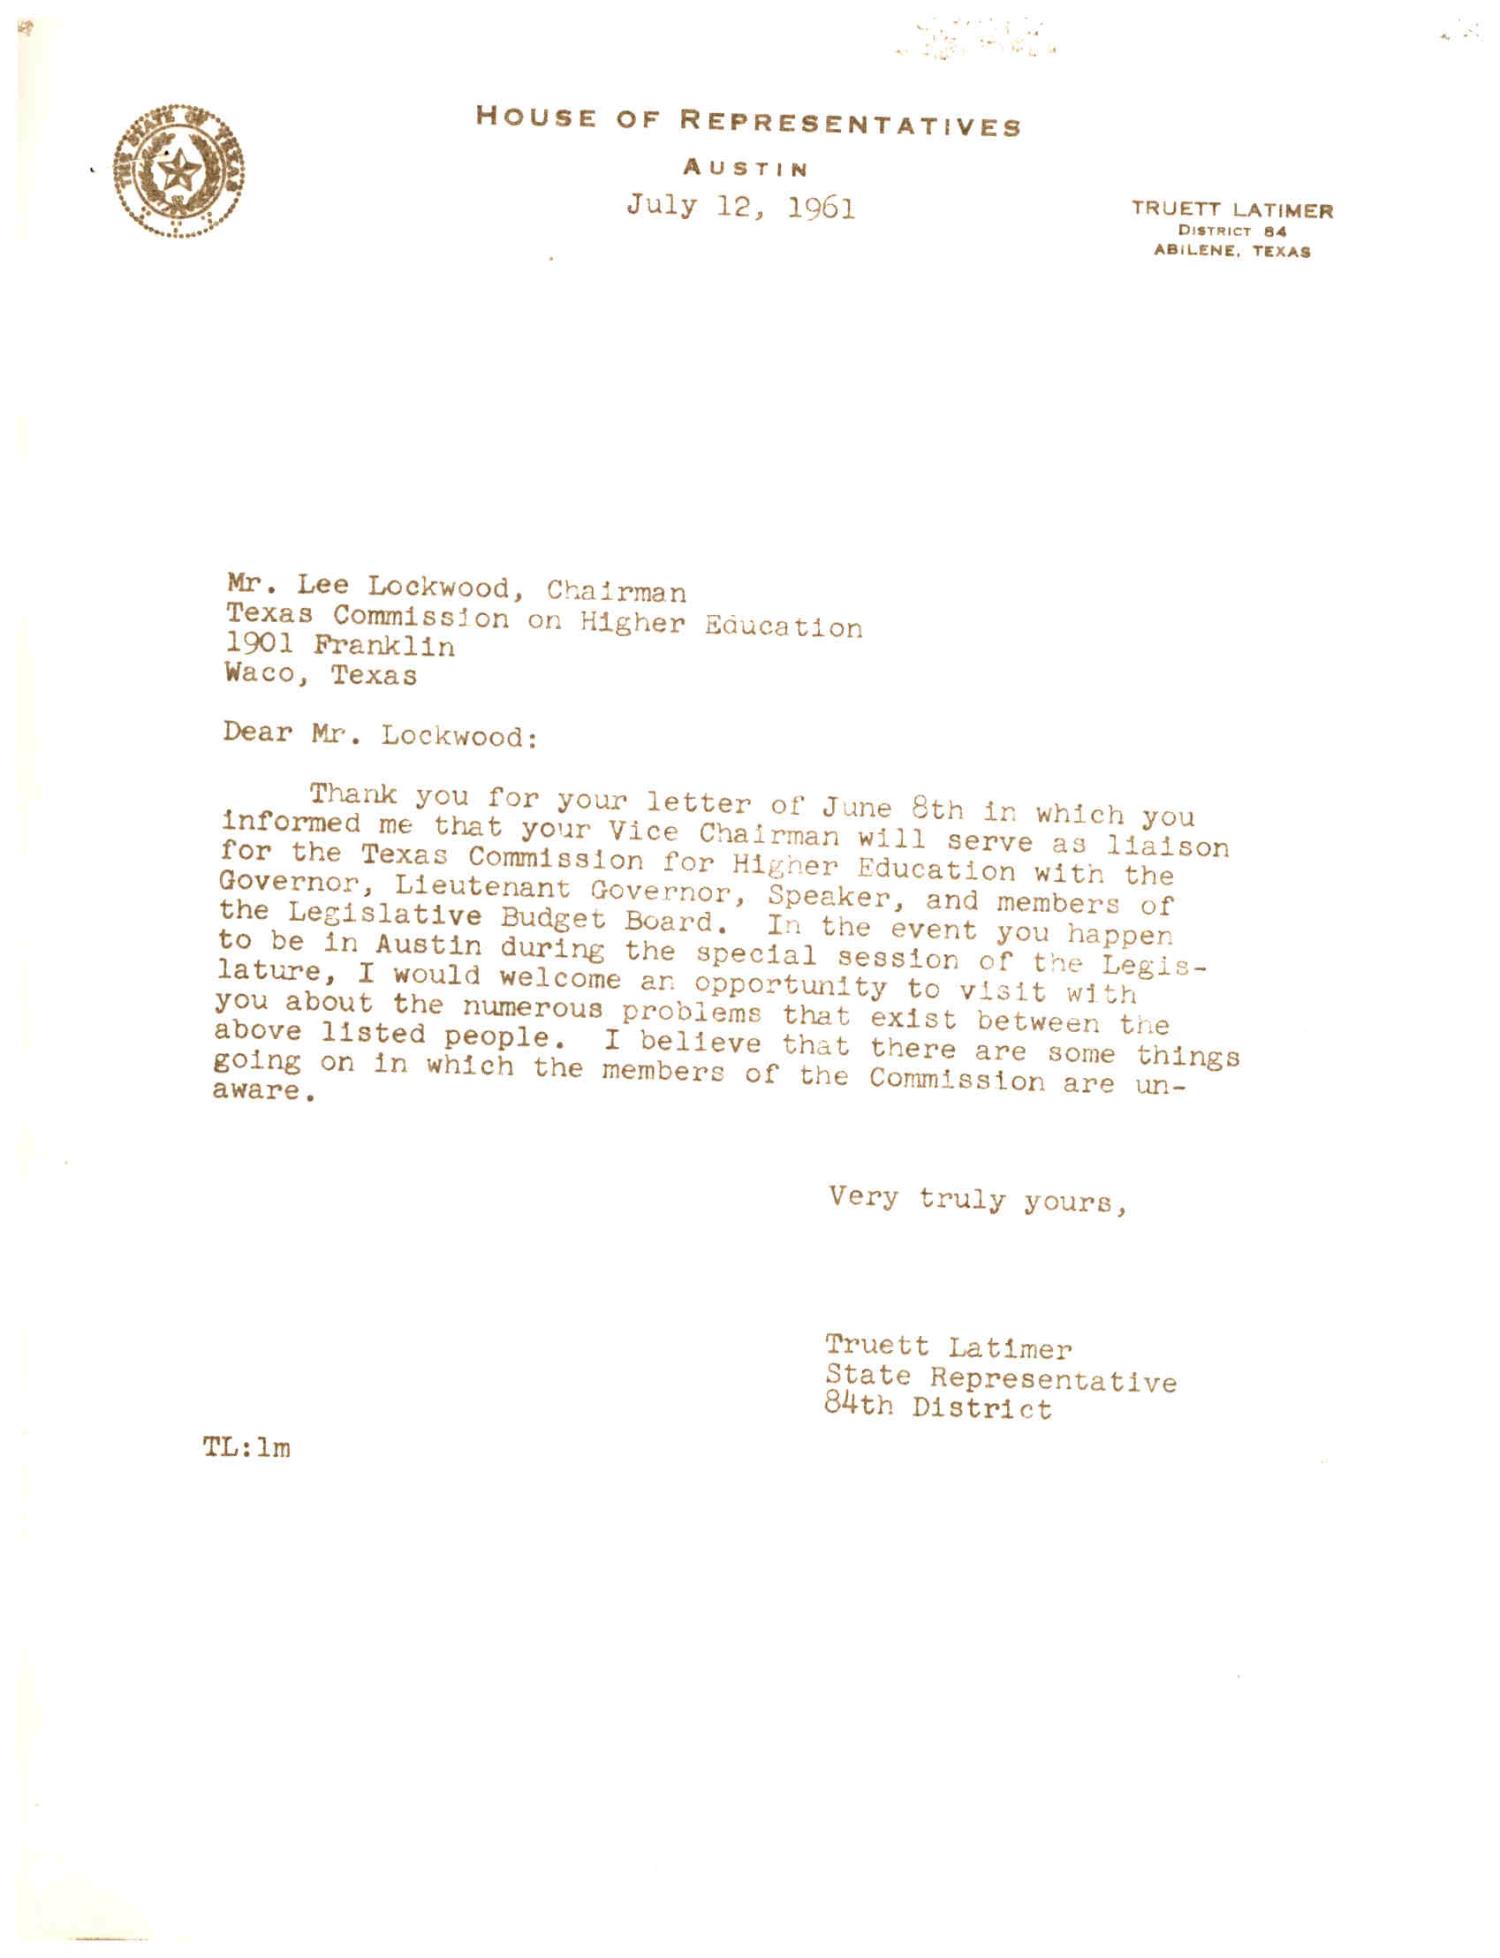 [Letter from Truett Latimer to Lee Lockwood, July 12, 1961]
                                                
                                                    [Sequence #]: 1 of 1
                                                